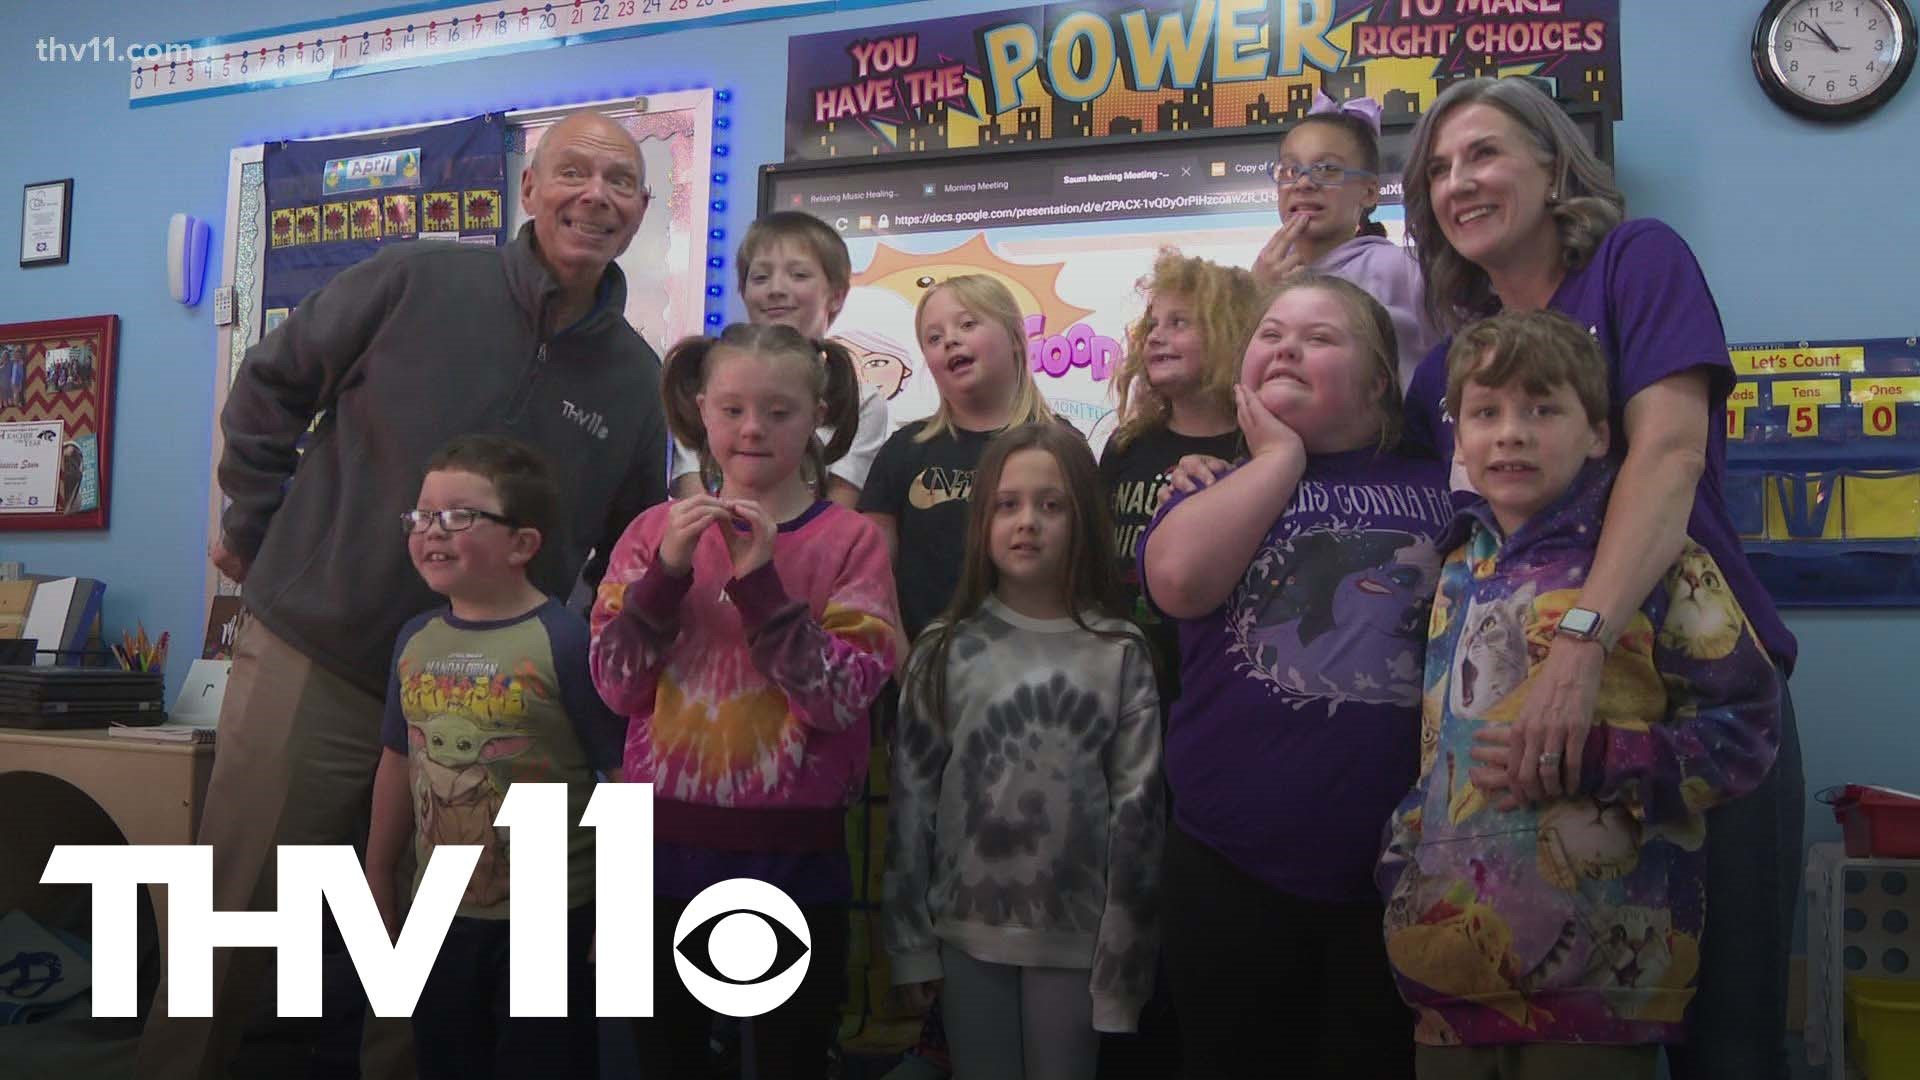 Jessica Saum is no ordinary teacher, she was named 2022 Arkansas Teacher of the Year, and Craig O'Neill gives us an inside look of her classroom.